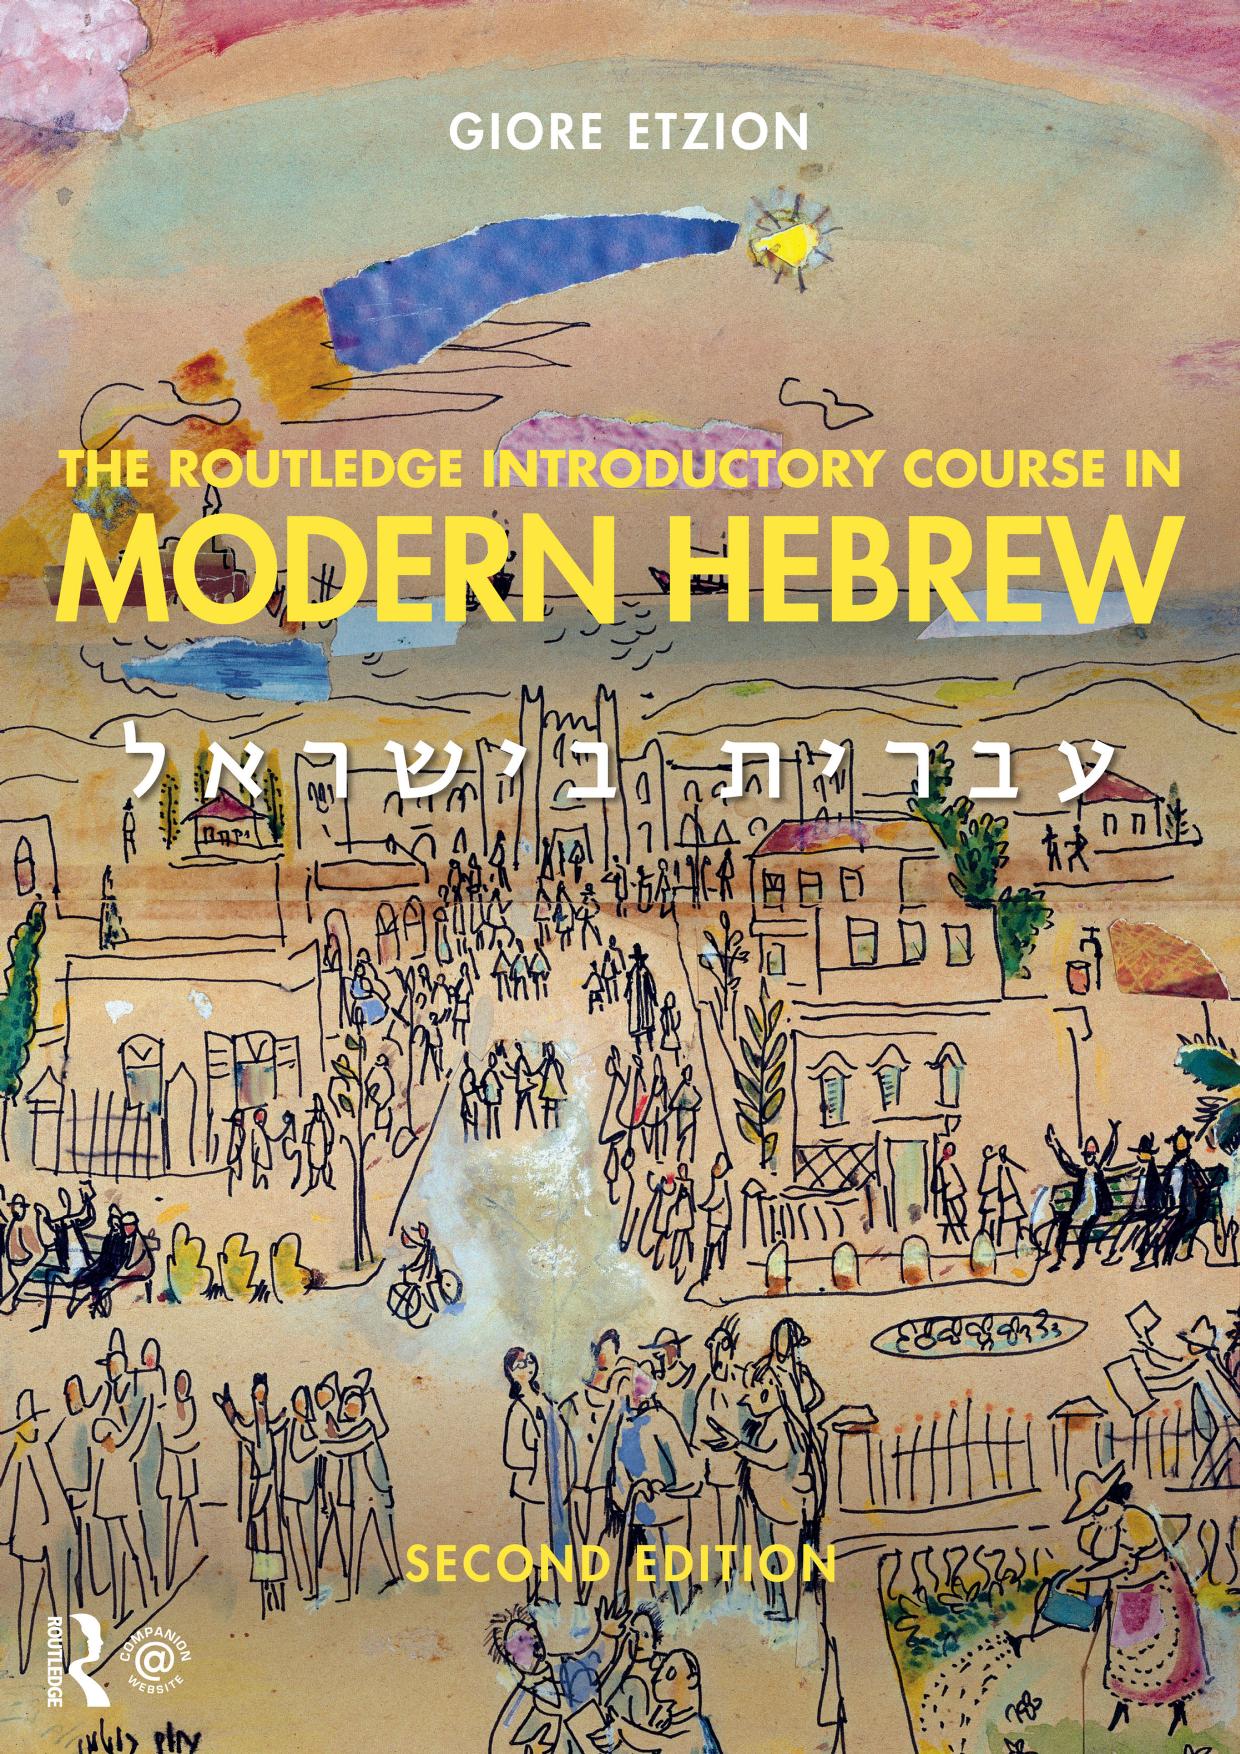 The Routledge Introductory Course in Modern Hebrew; Second Edition by Giore Etzion & Dick Beutick